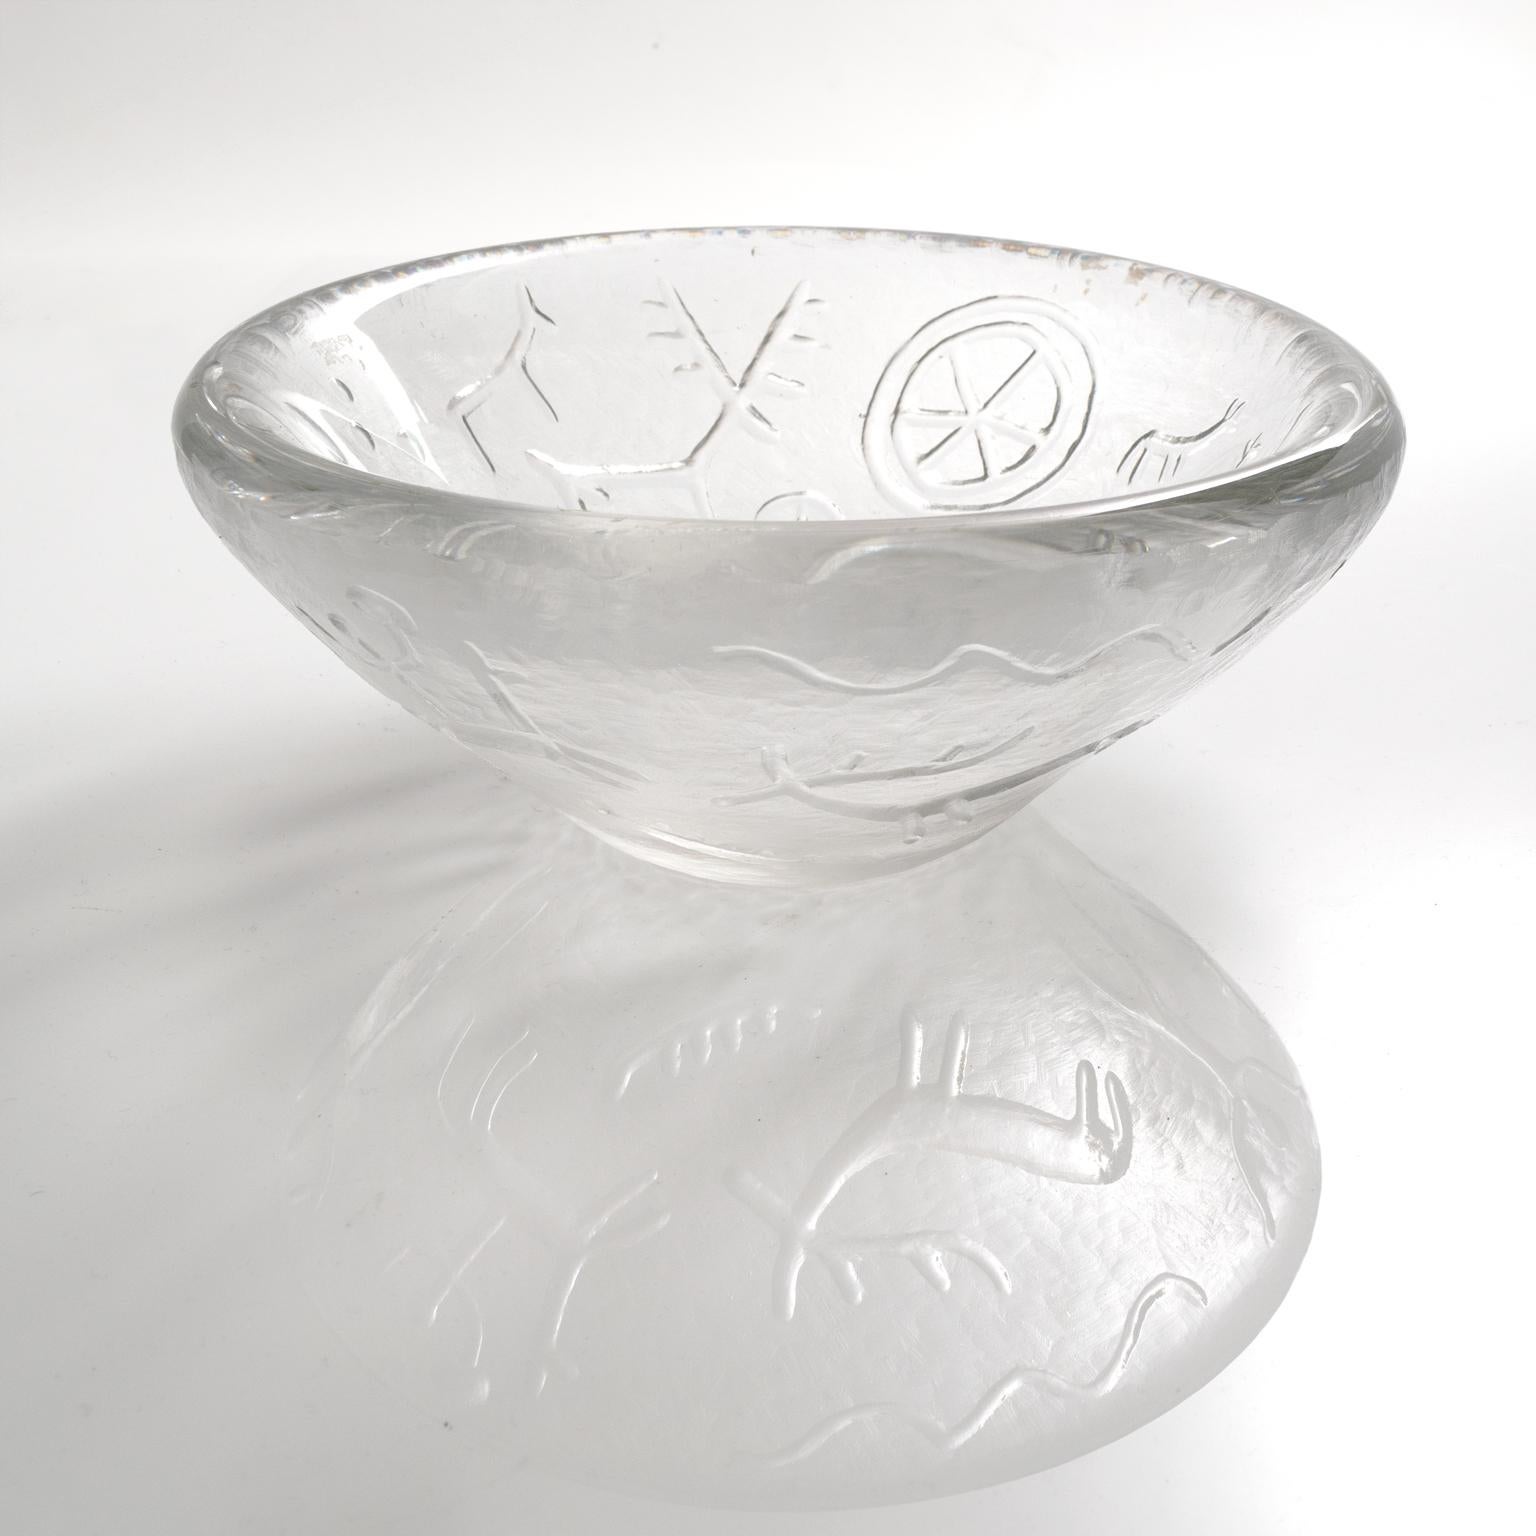 Swedish designer Vicke Lindrand designed this thick crystal bowl in the 1950s for Kosta. It depicts figures and symbols from pre-historic cave painting.

Measure: Diameter 9.5